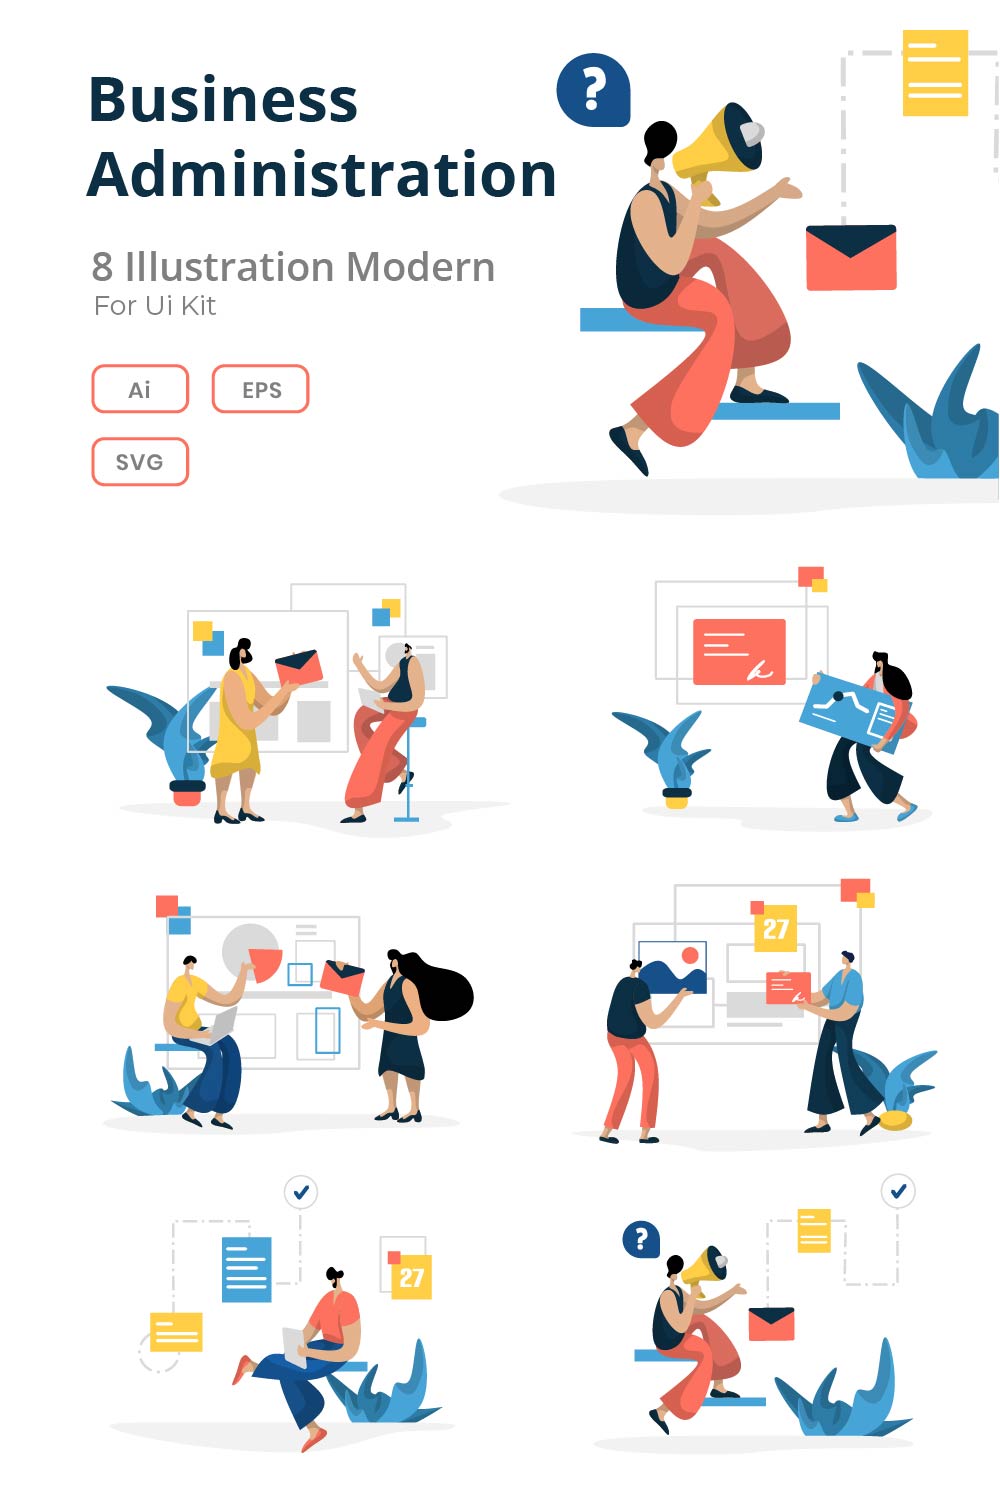 So modern and cool illustrations.